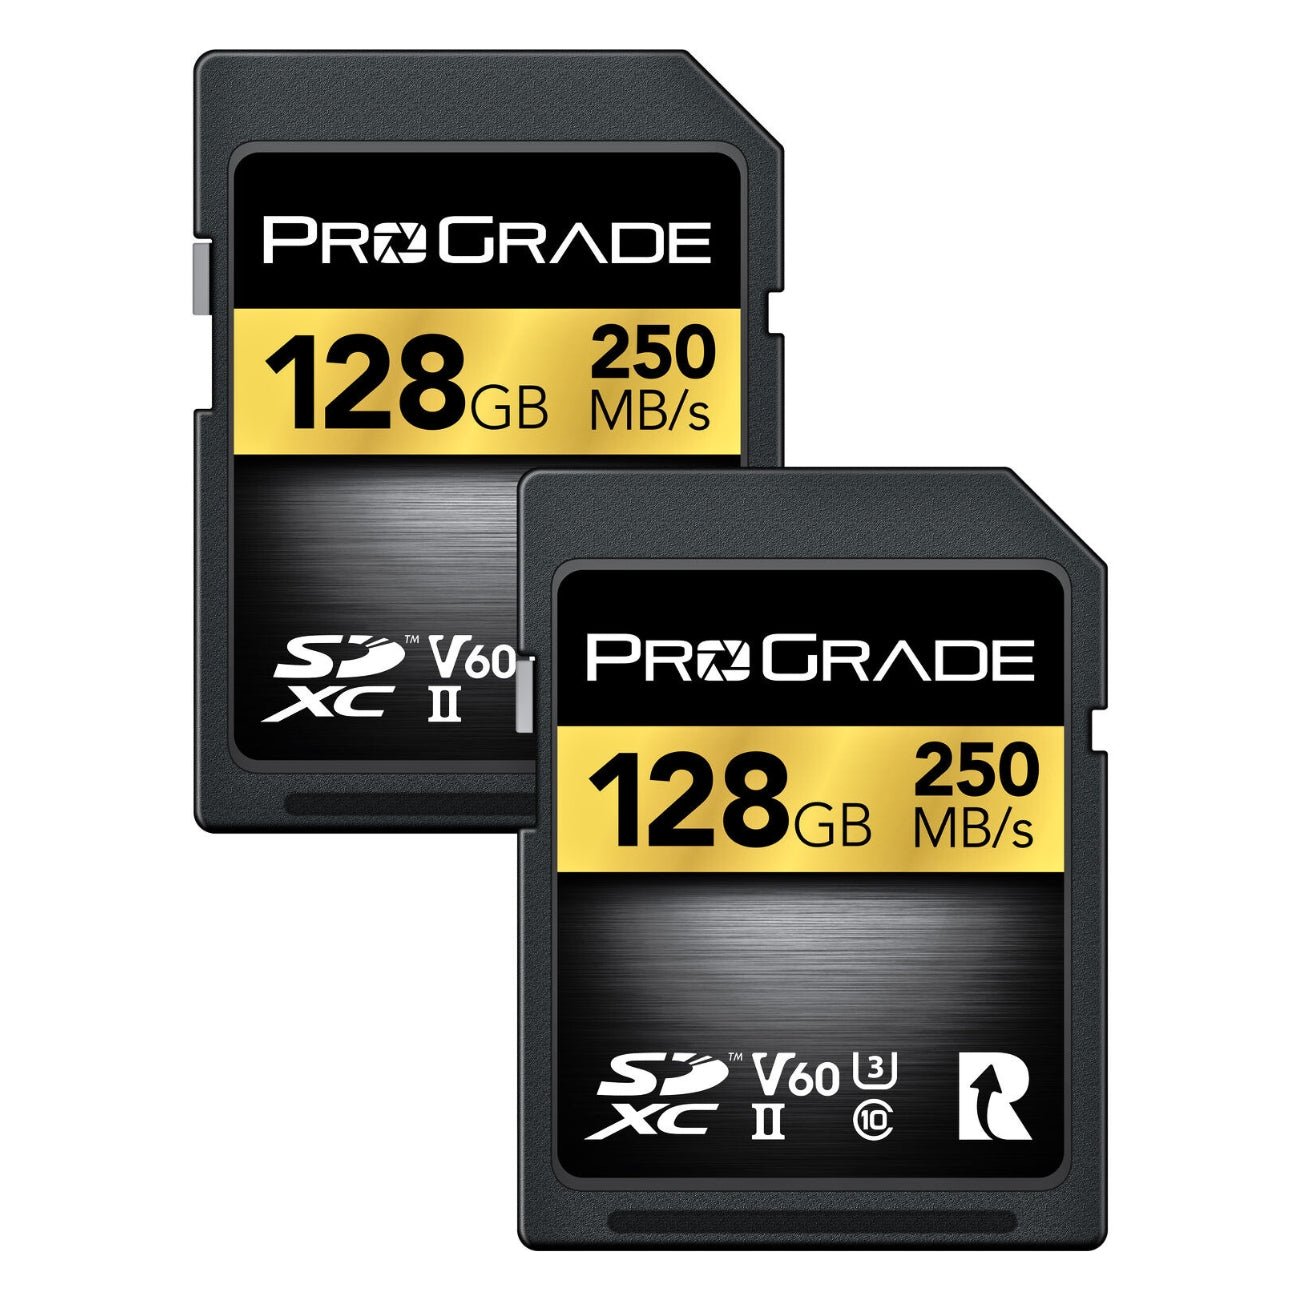 SD UHS-II 128GB Card V60 –Up to 130MB/s Write Speed and 250 MB/s Read Speed | for Professional Vloggers, Filmmakers, Photographers & Content Curators – by Prograde Digital / uhs ii sd card 128gb